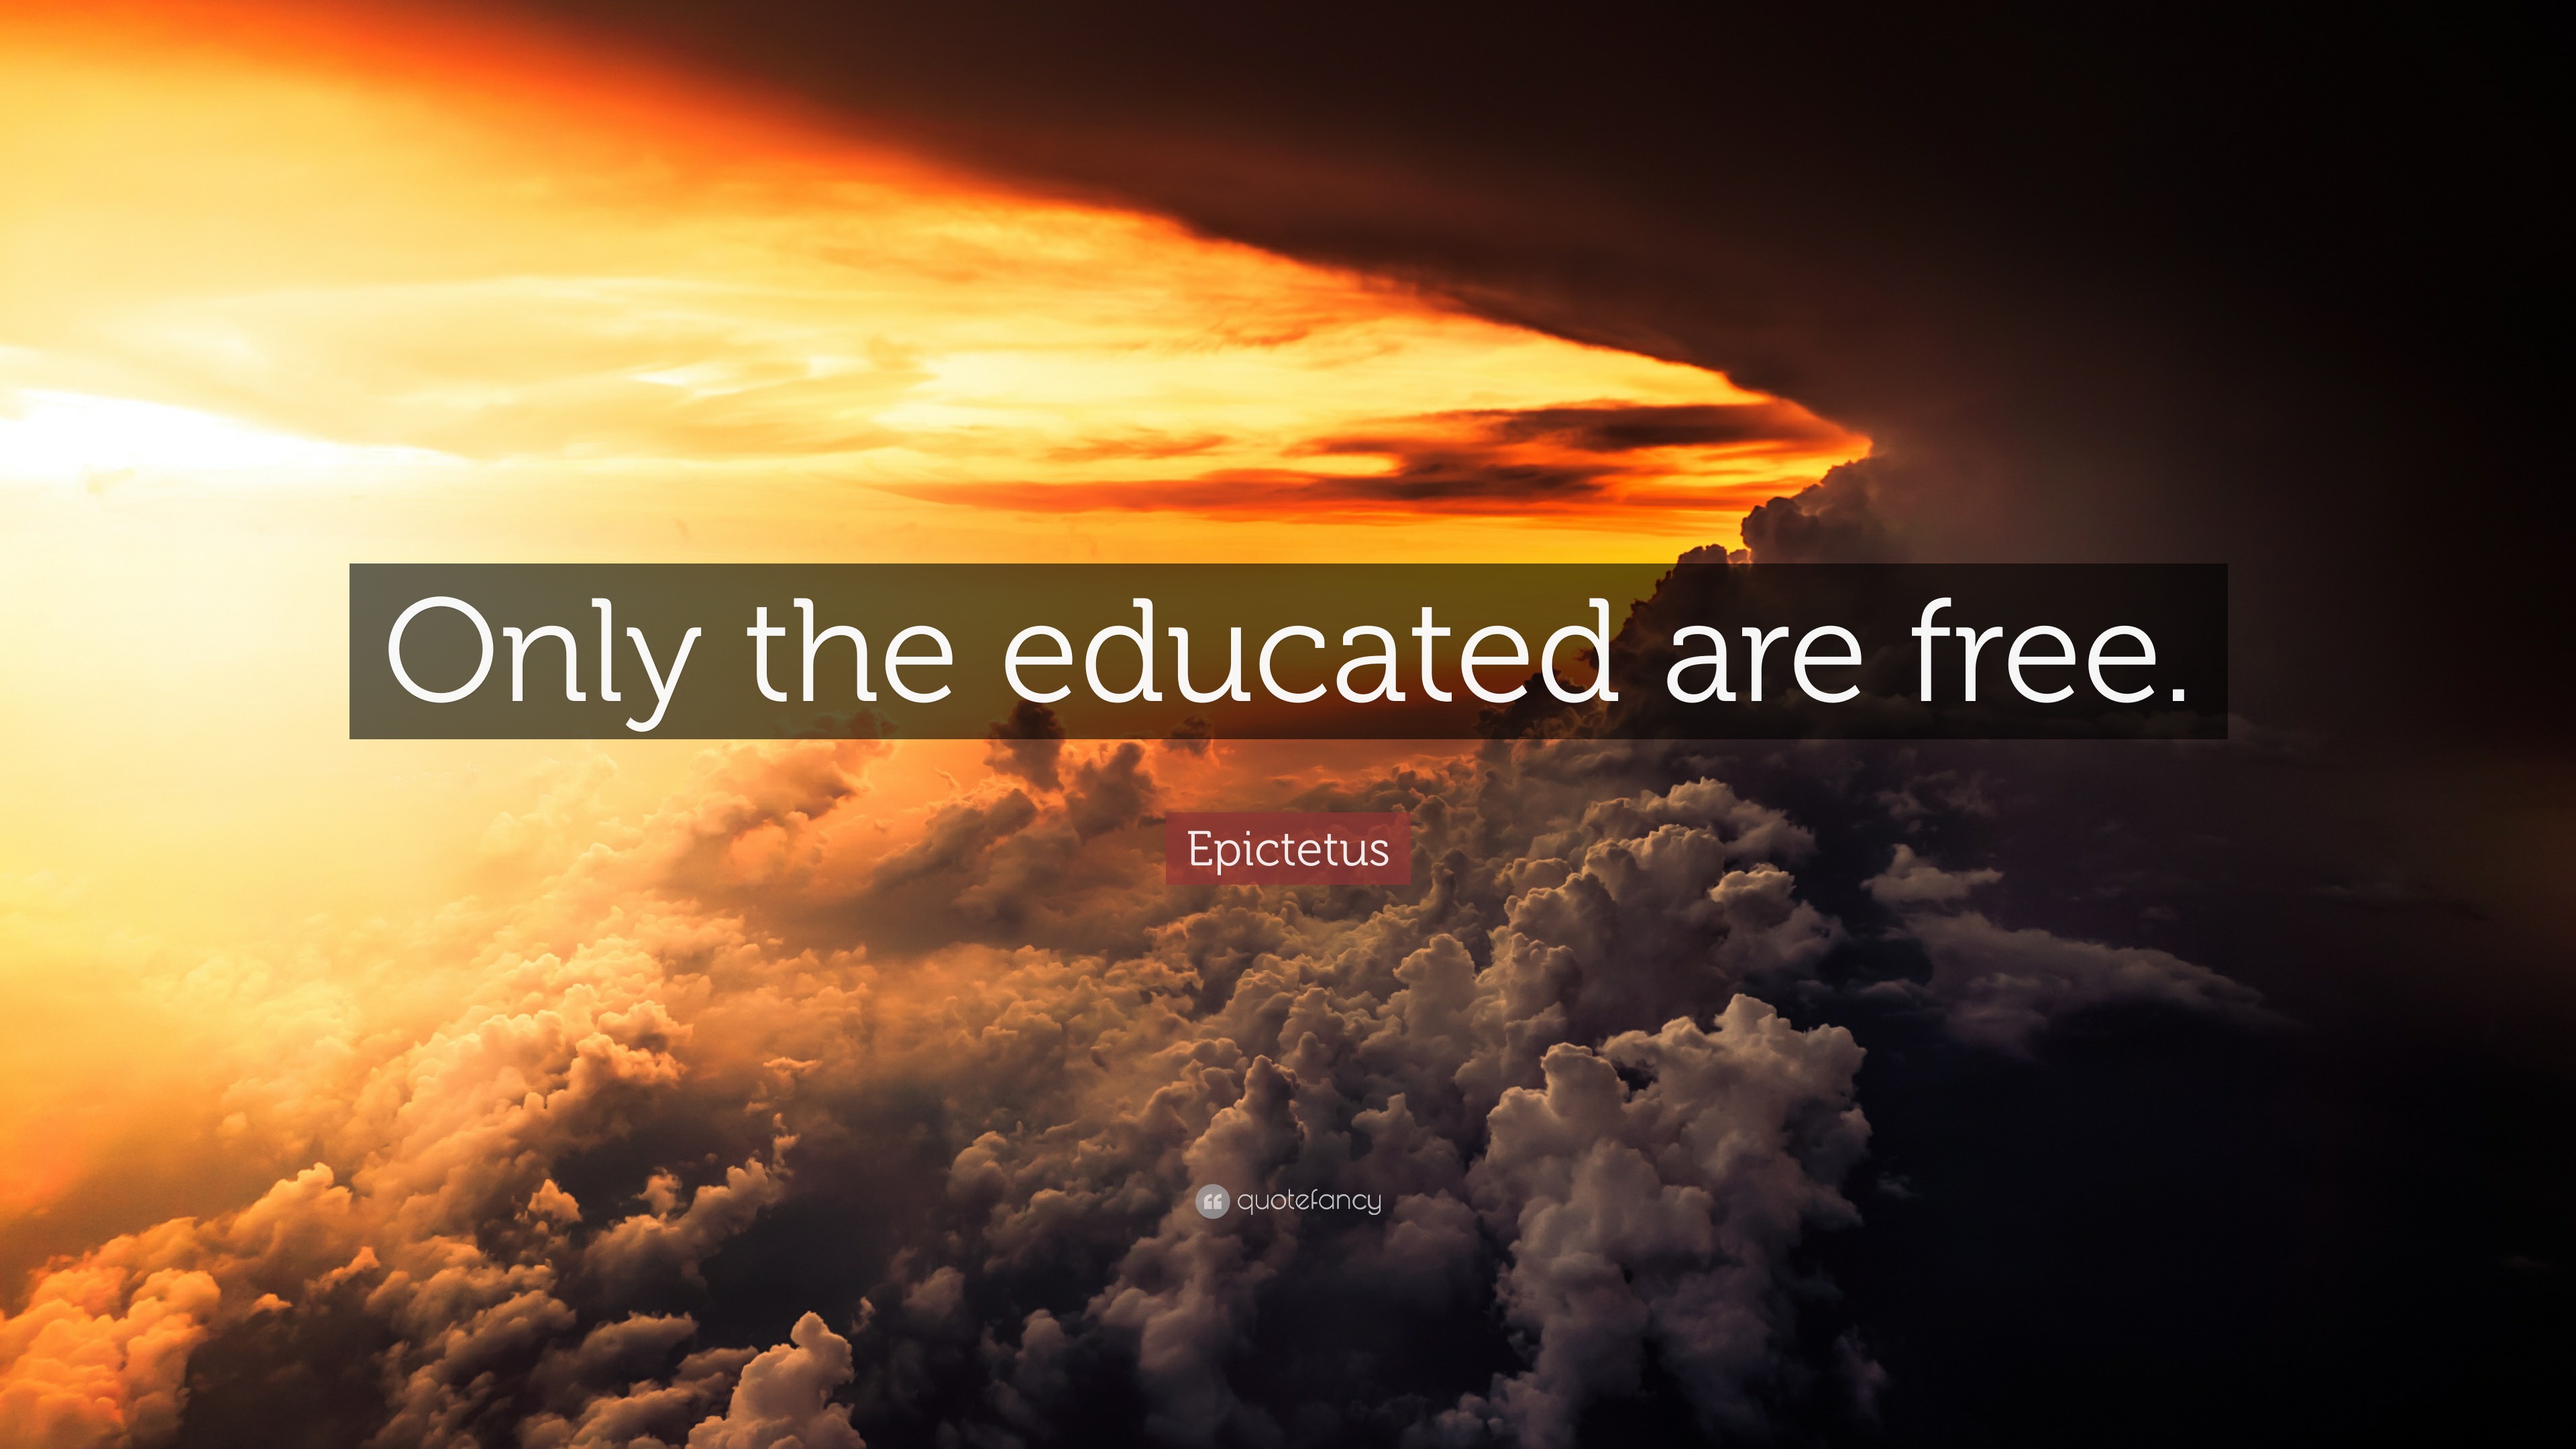 2196195-Epictetus-Quote-Only-the-educated-are-free.jpg